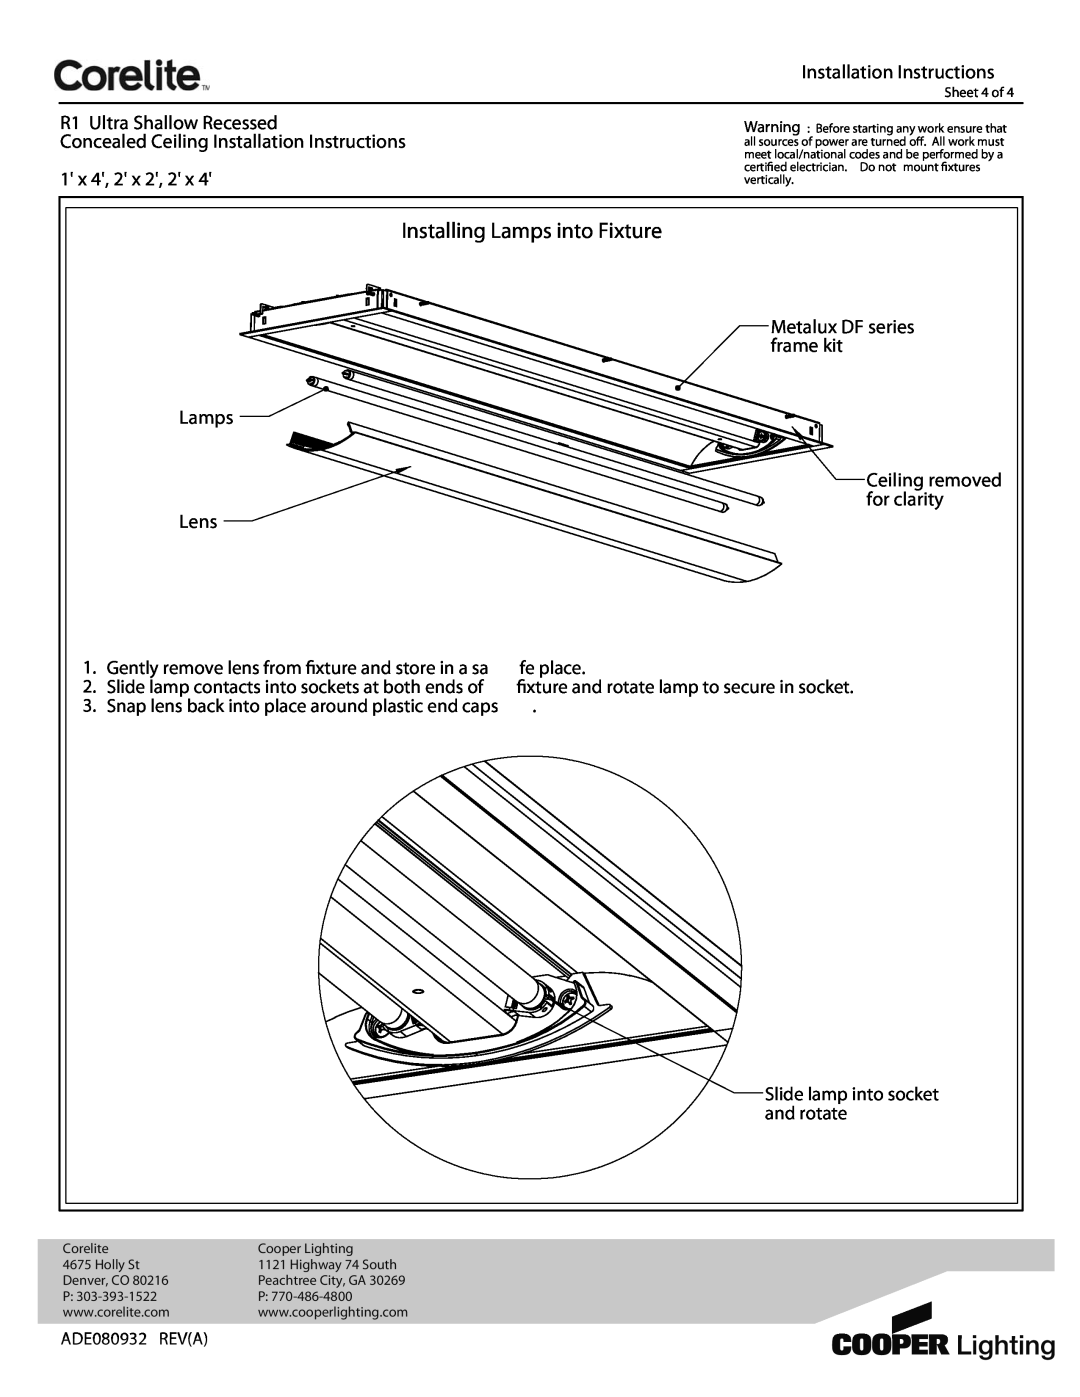 Cooper Lighting Installing Lamps into Fixture, Installation Instructions, fe place, ADE080932 REVA, Sheet 4 of 